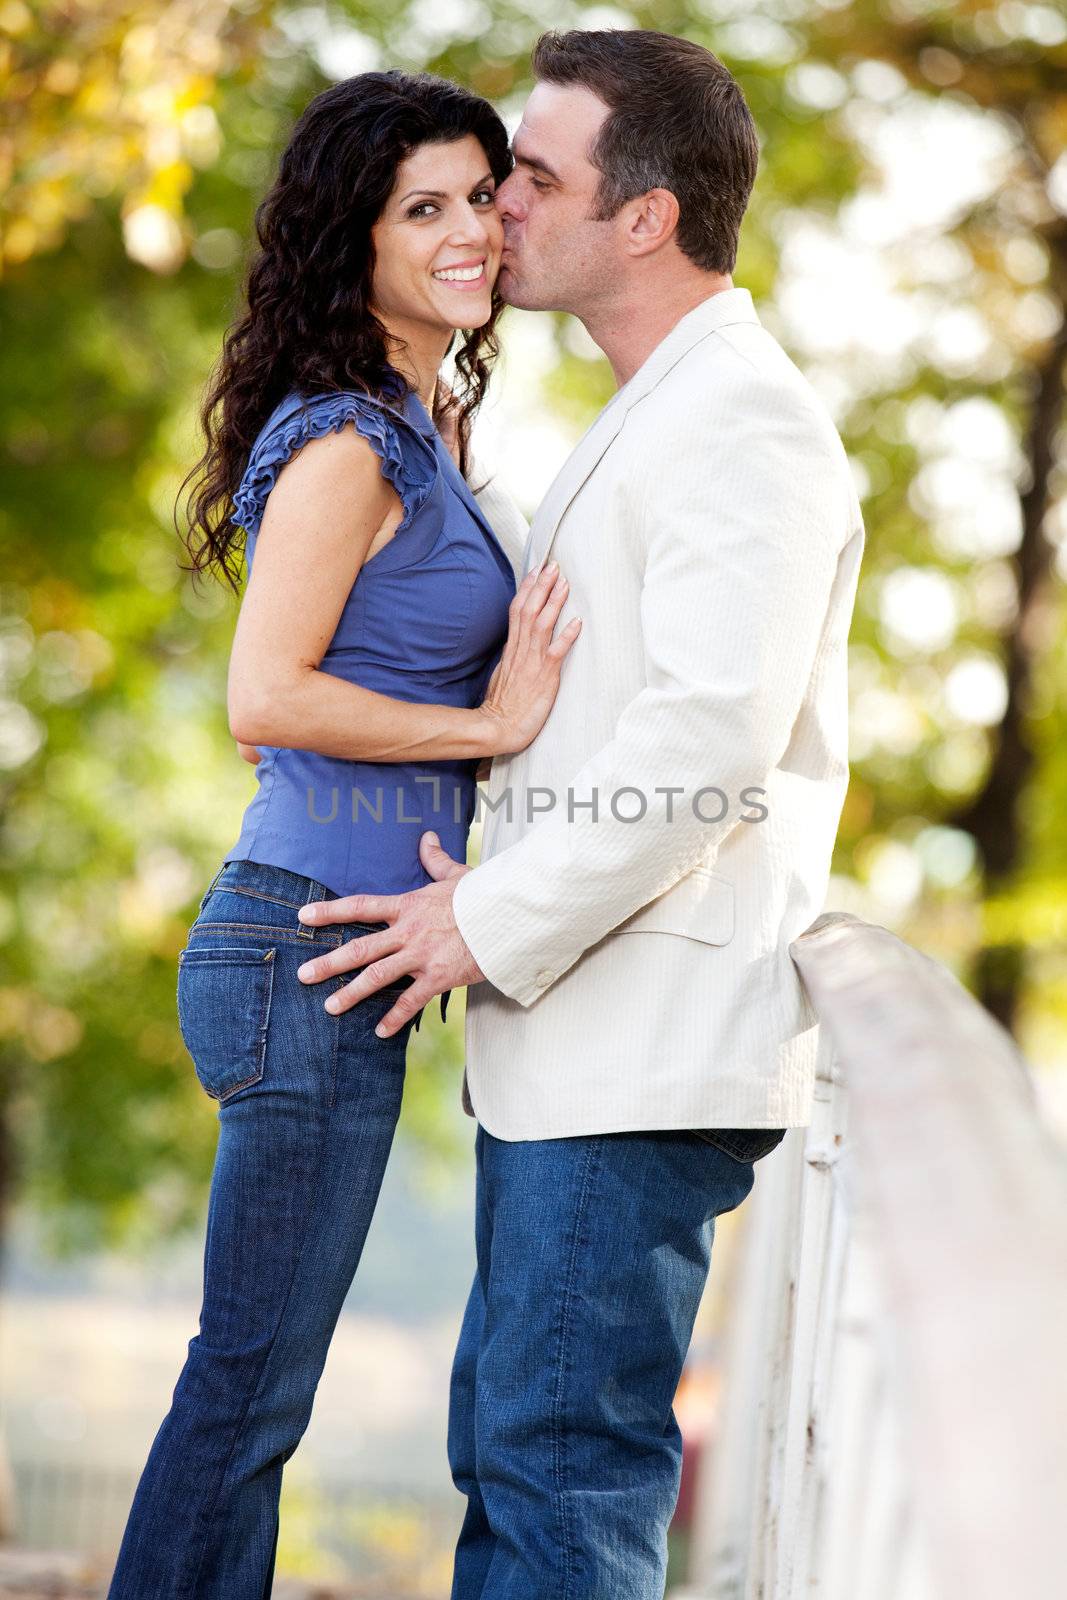 A man kissing a woman on the cheek in a park